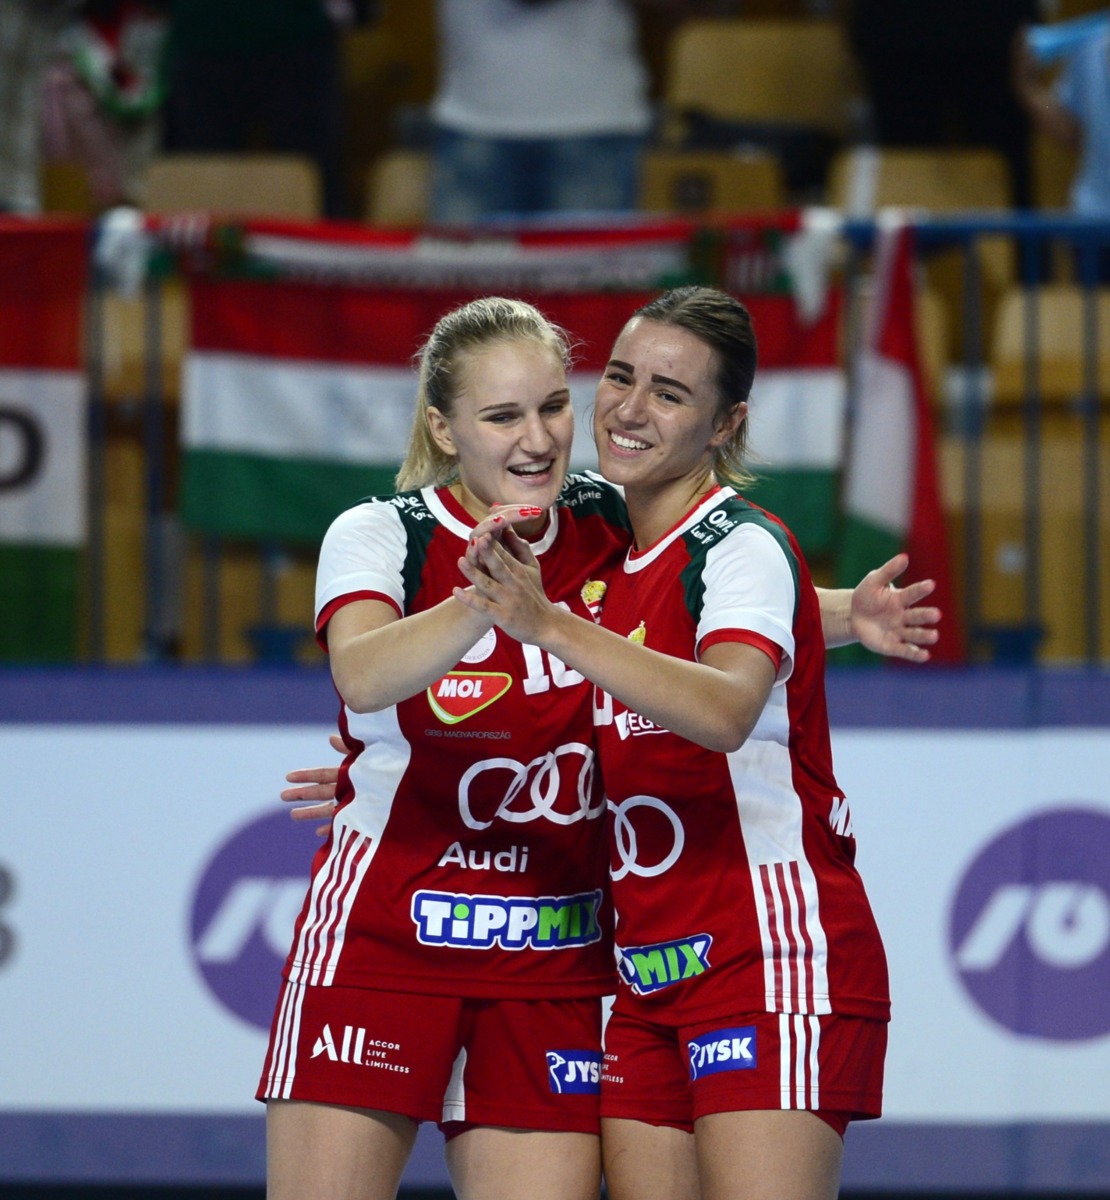 Hungary crowned the European champion as they win the gold medal!